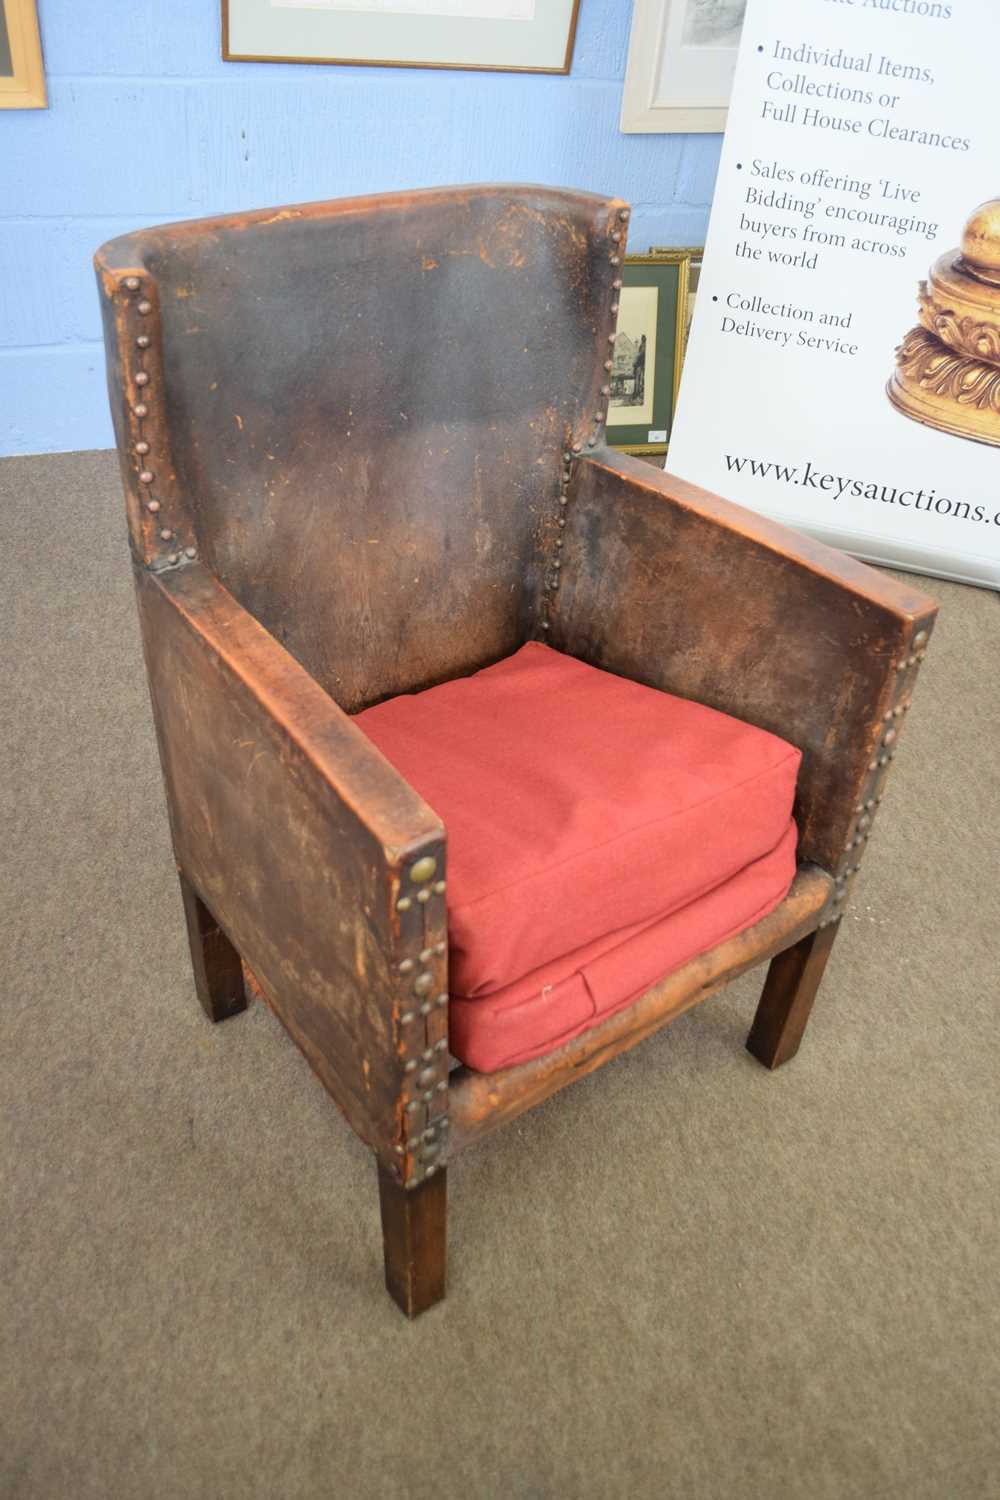 Early 20th century brown leather upholstered small armchair with sprung seat, 56cm wide - Image 2 of 4